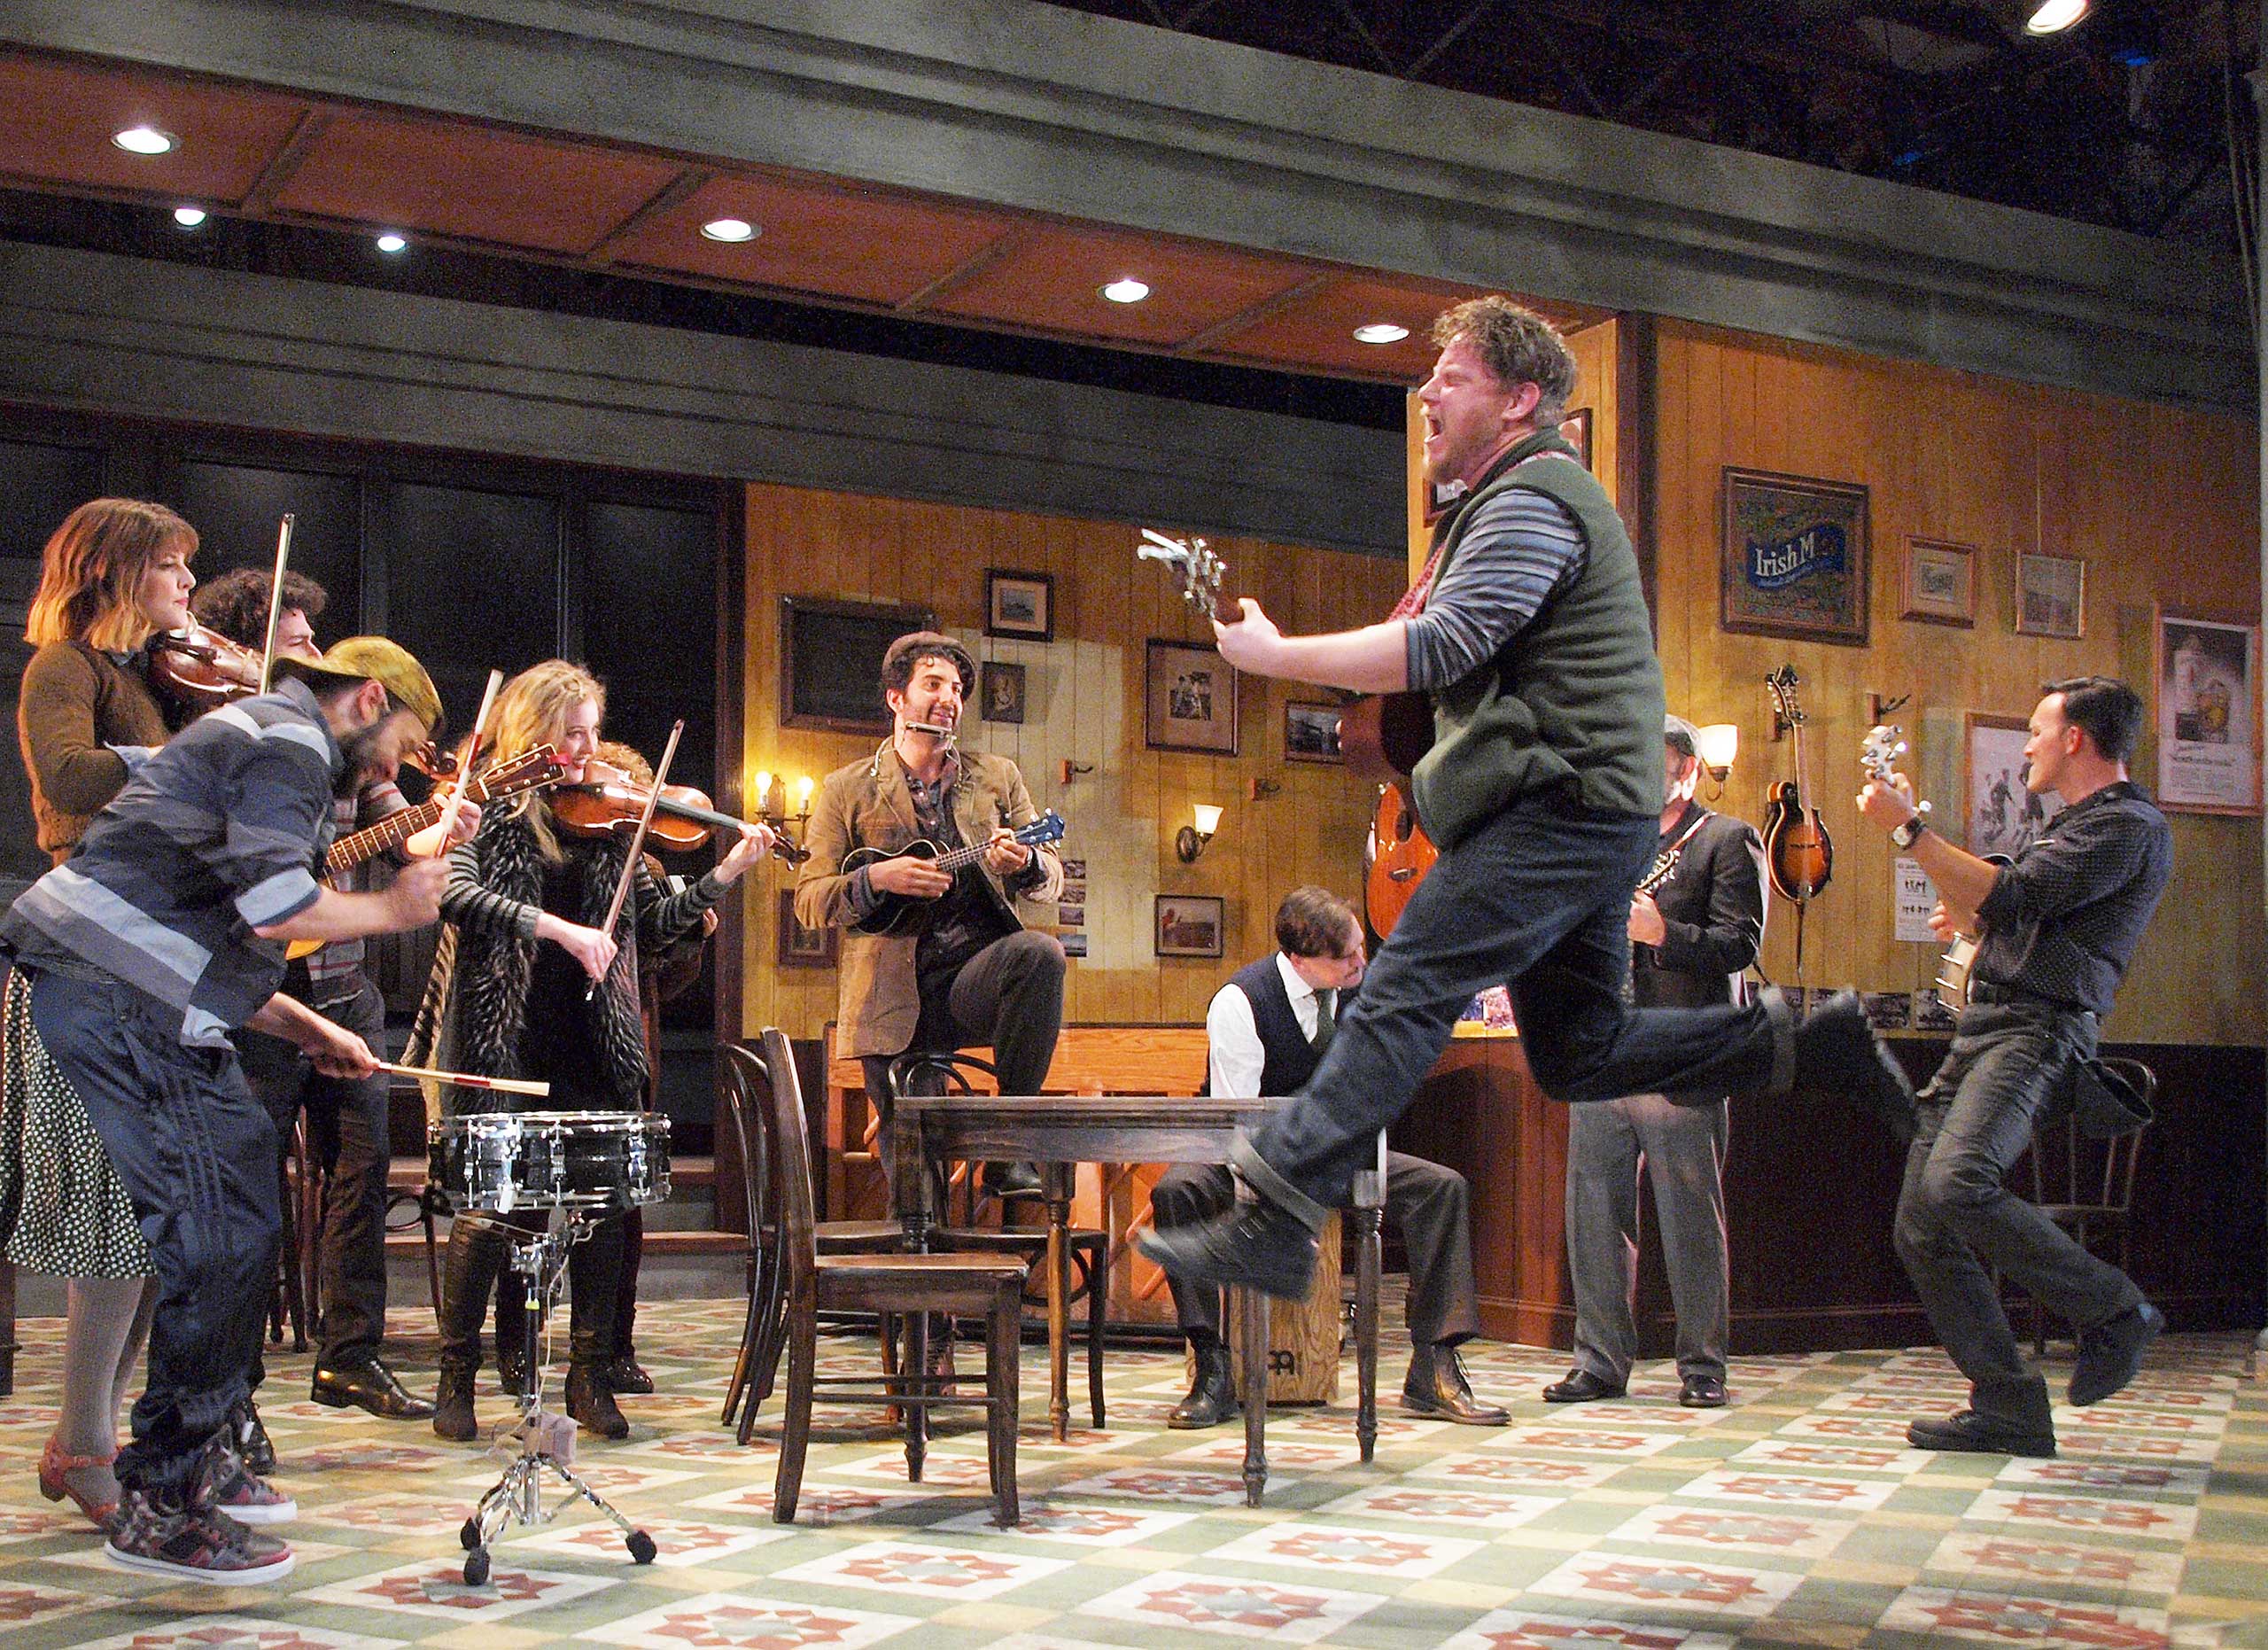 Actors rehearse for a musical on stage